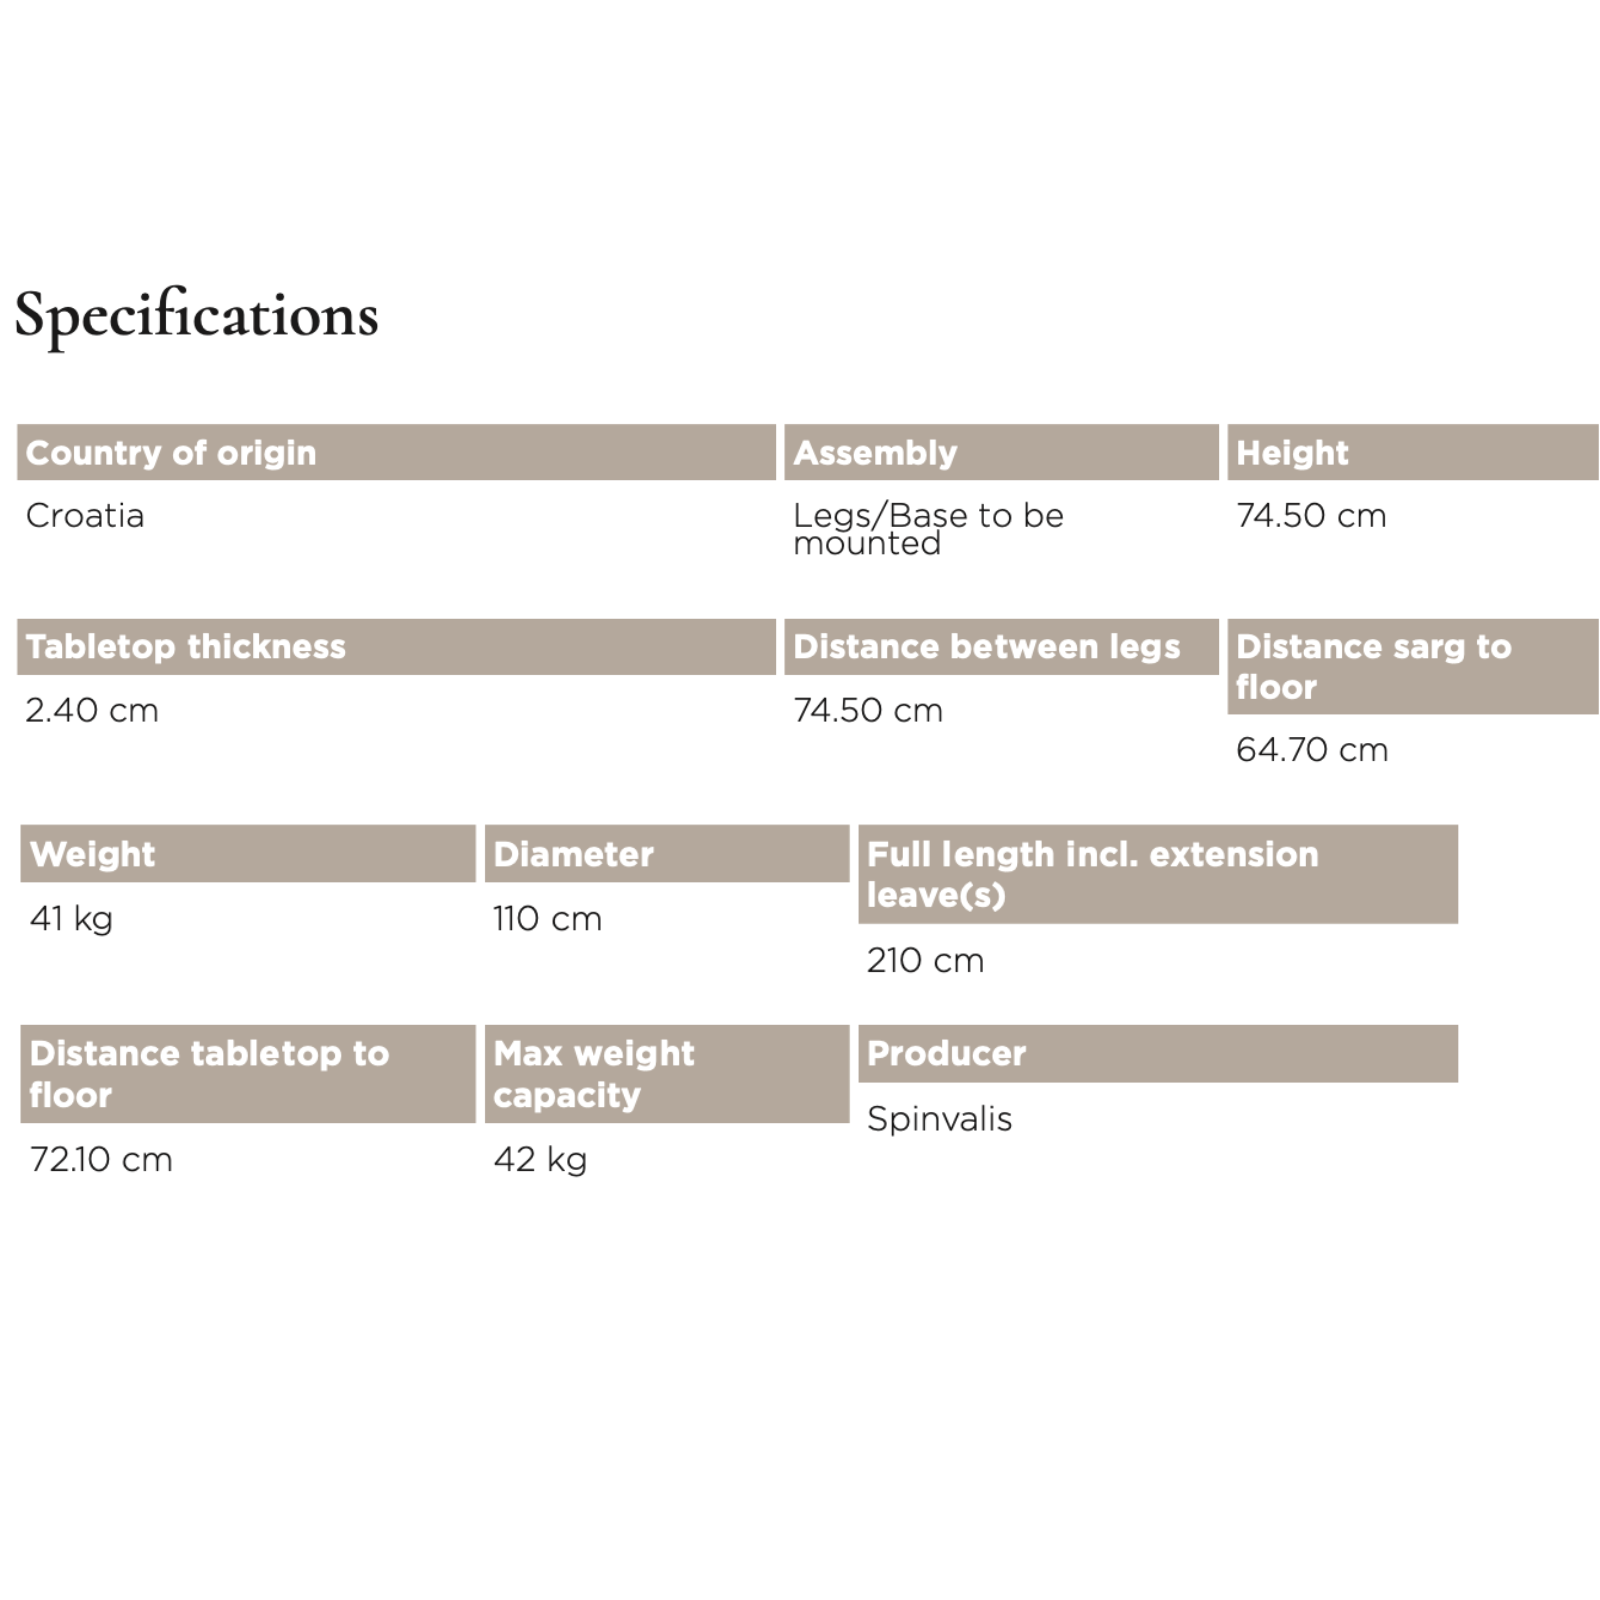 BOLIA Fusion Table Specifications